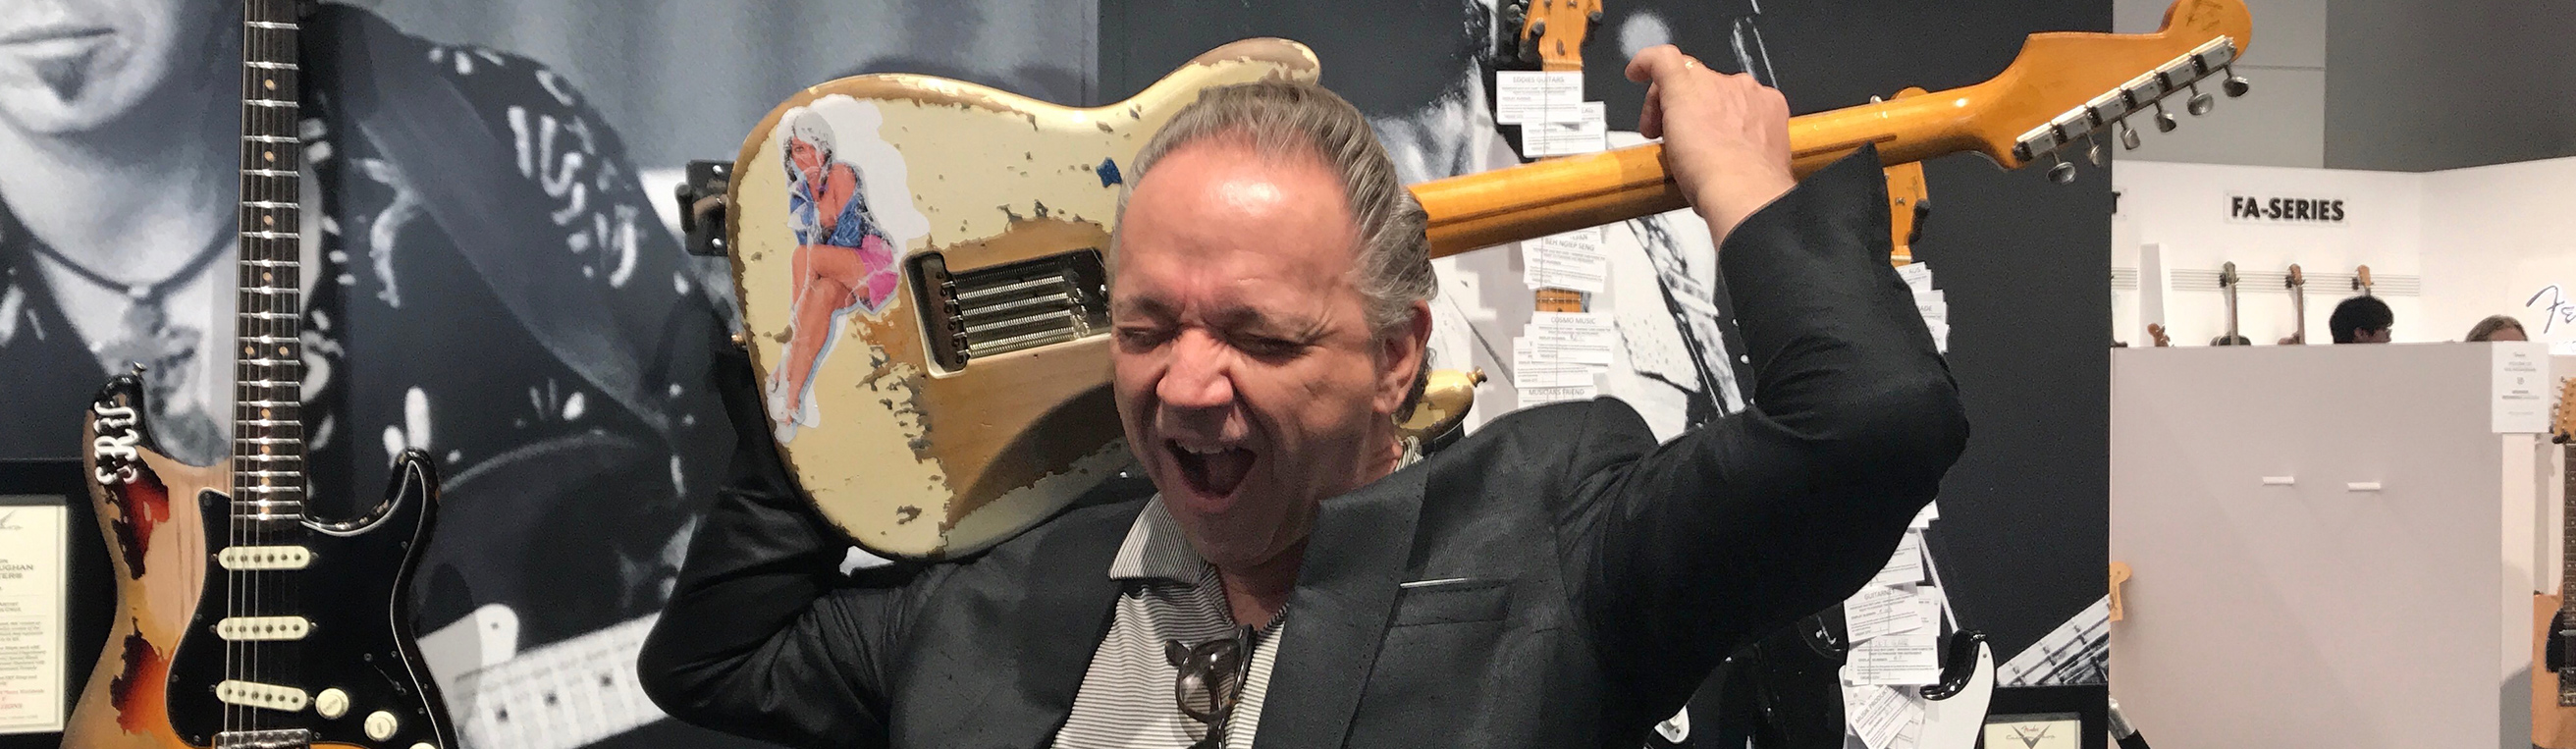 jimmie vaughan tour review